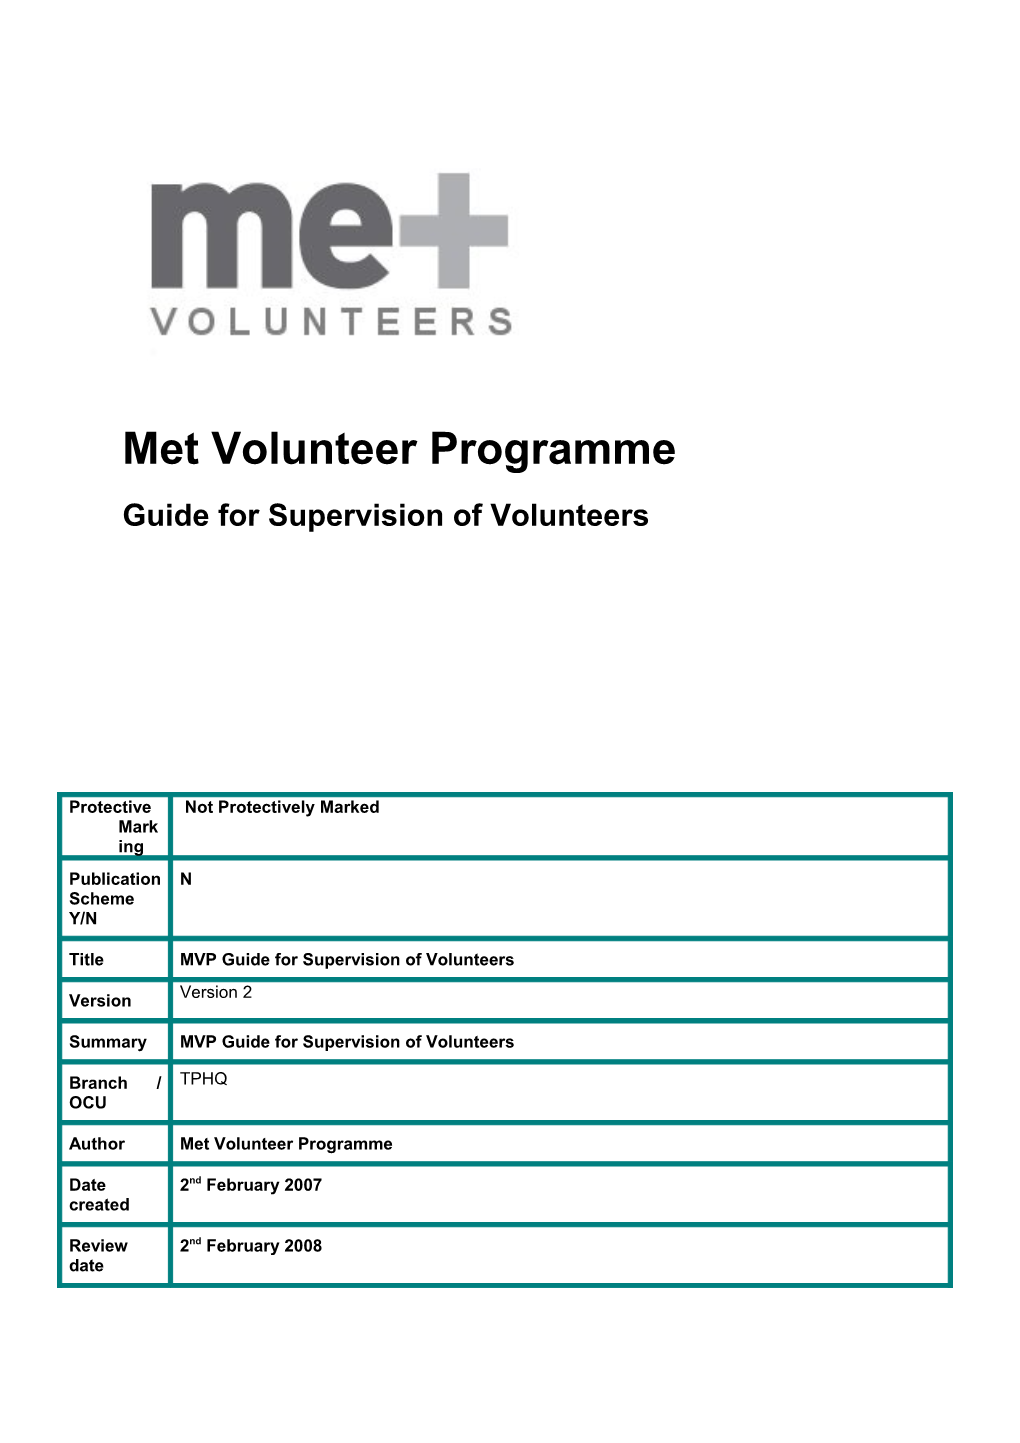 Guide for Supervision of Volunteers